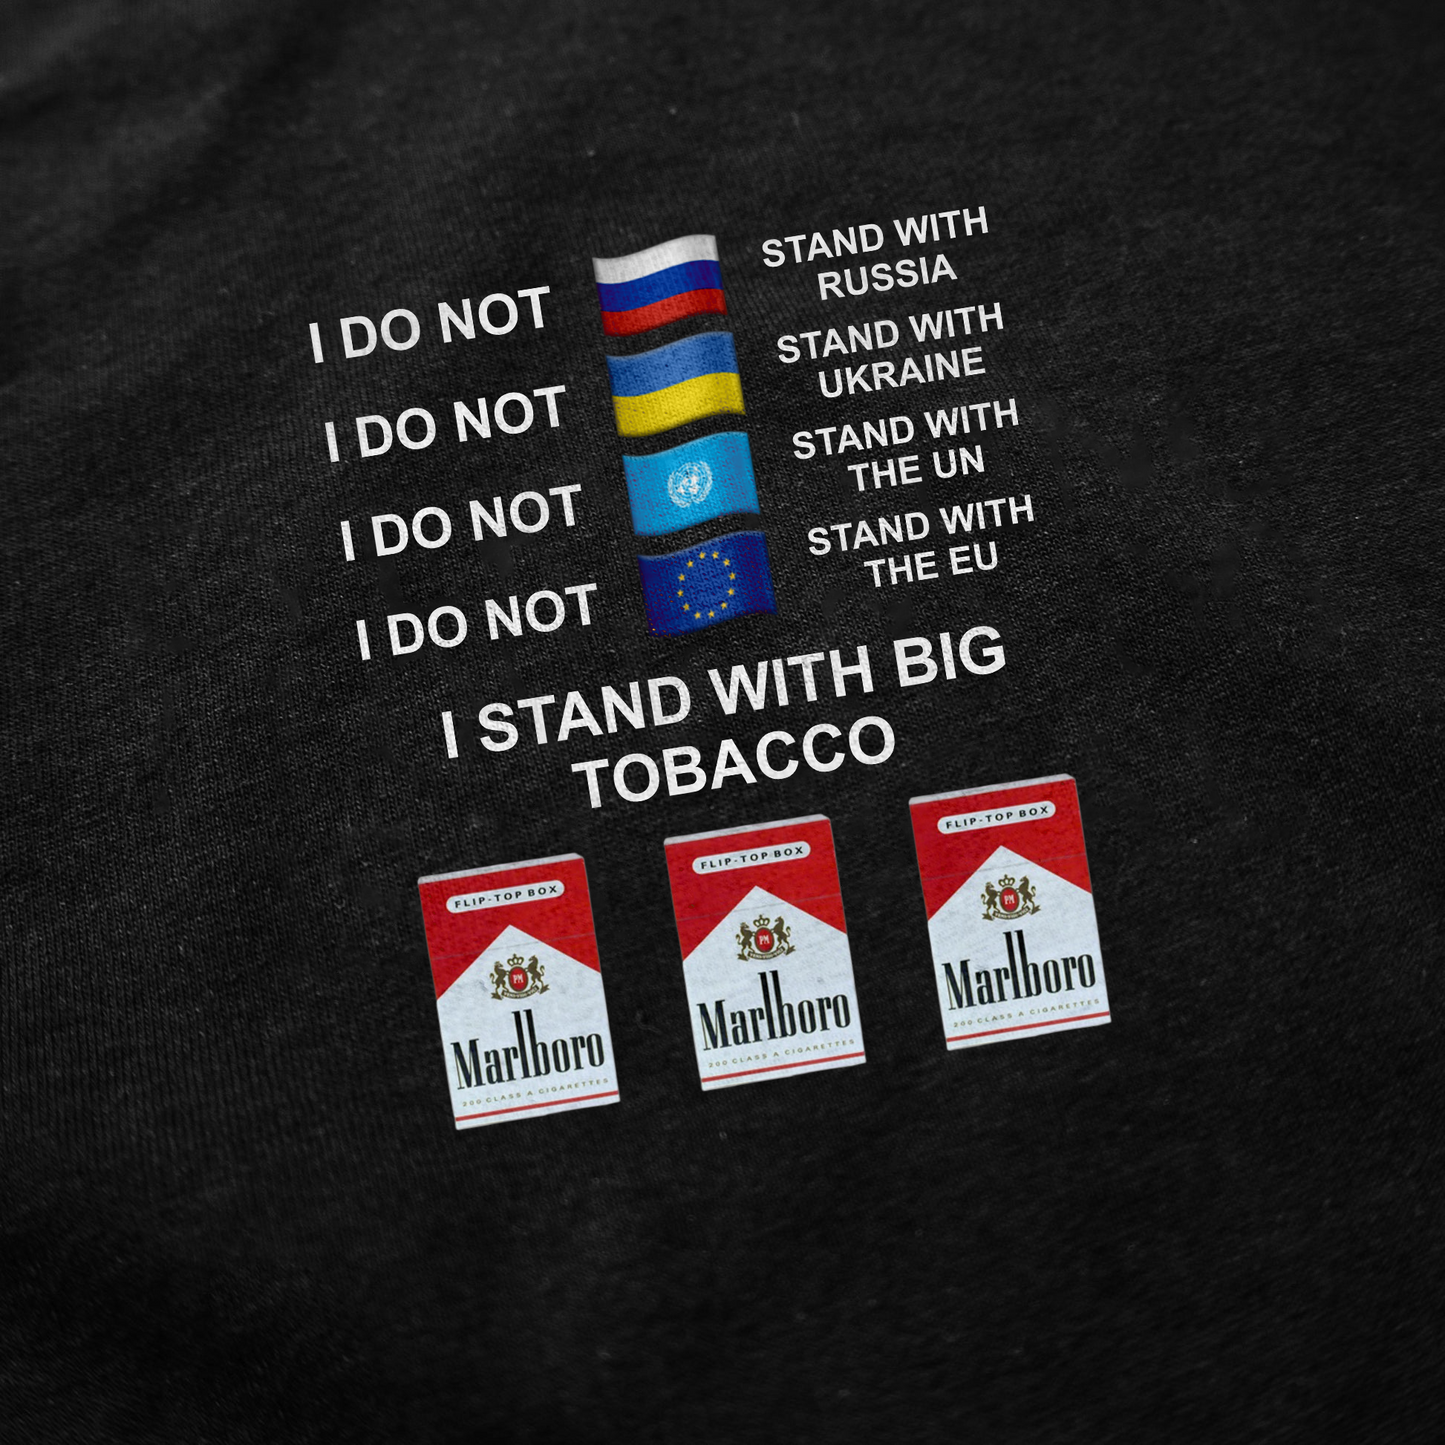 I Stand With Big Tobacco T-Shirt